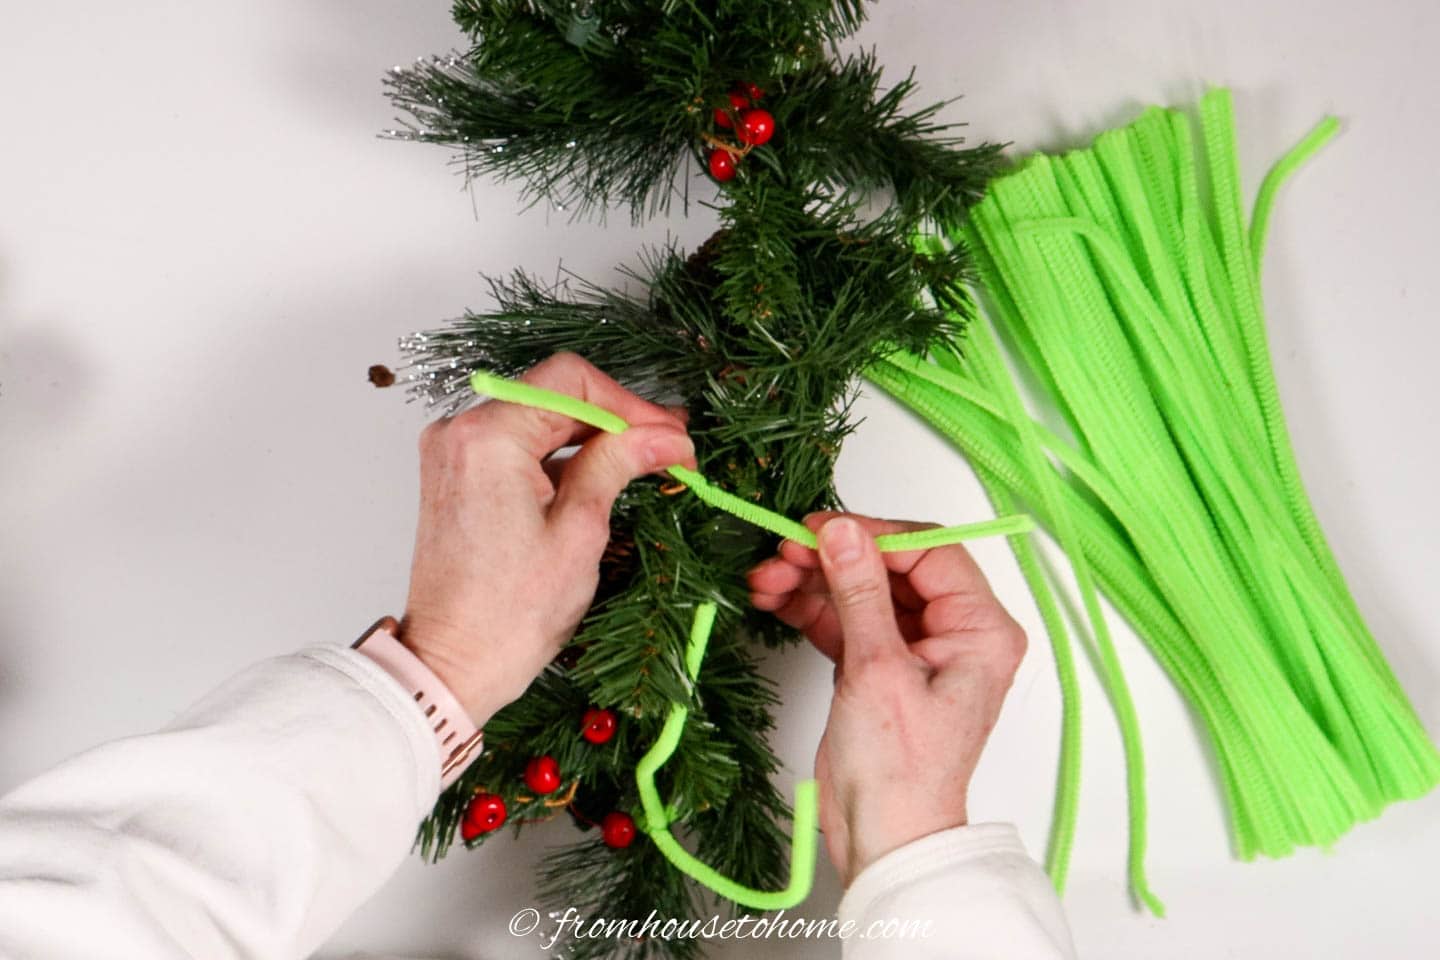 Lime green pipe cleaner being tied on evergreen garland